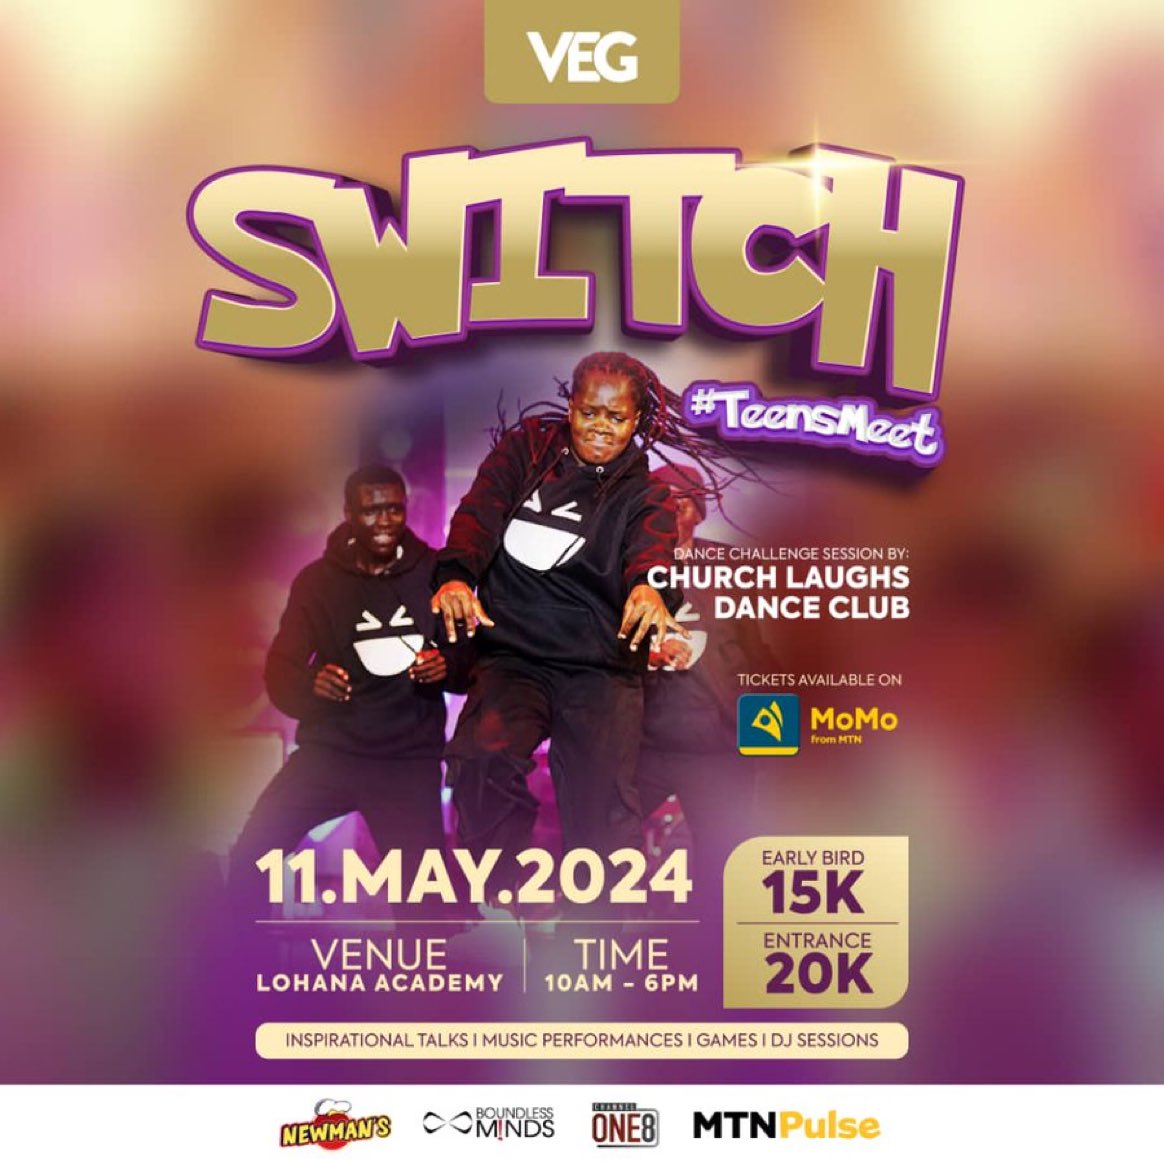 Get ready for a challenge session with @_churchlaughs at #Switch2024! 💃 #TeensMeet